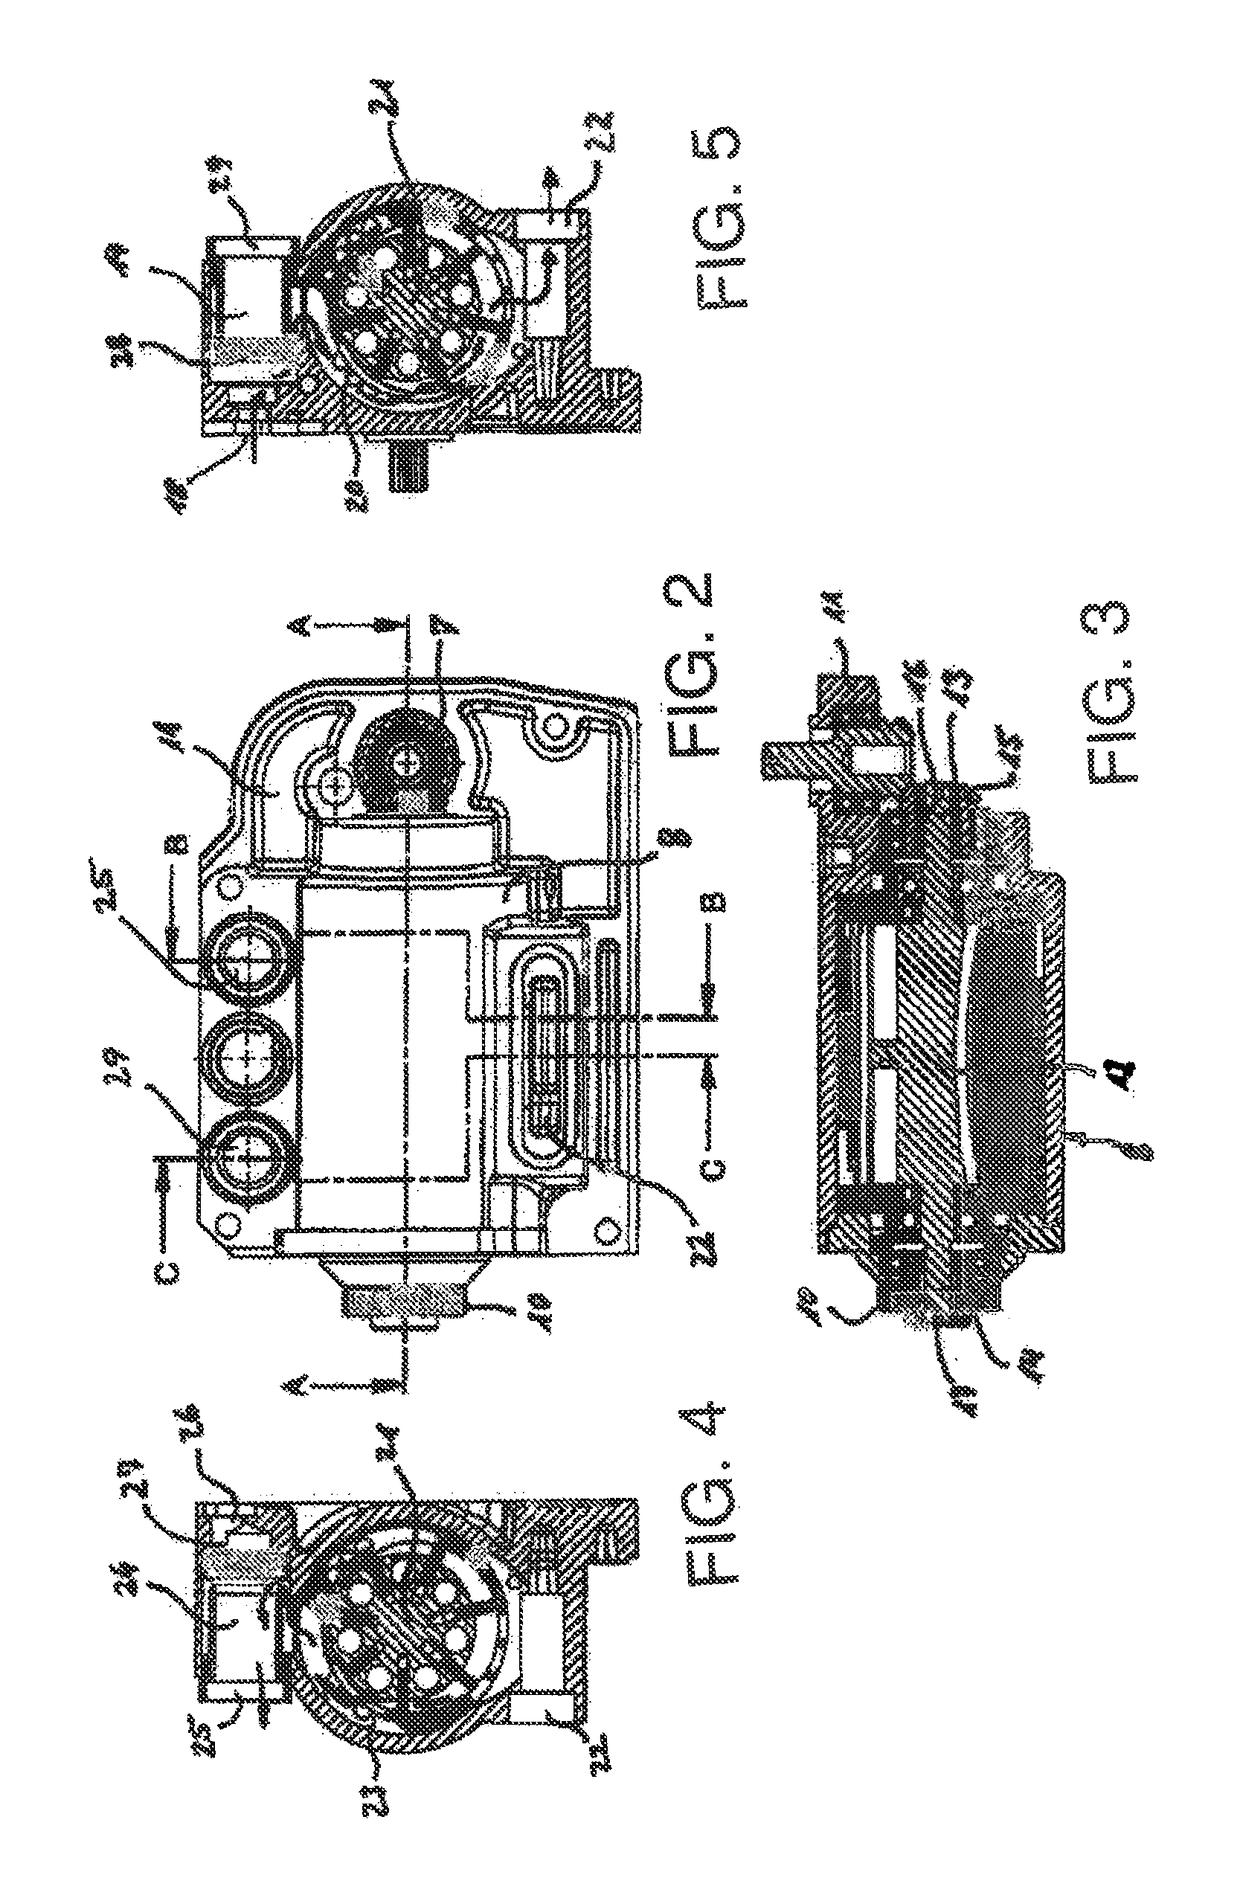 Pneumatic strapping apparatus